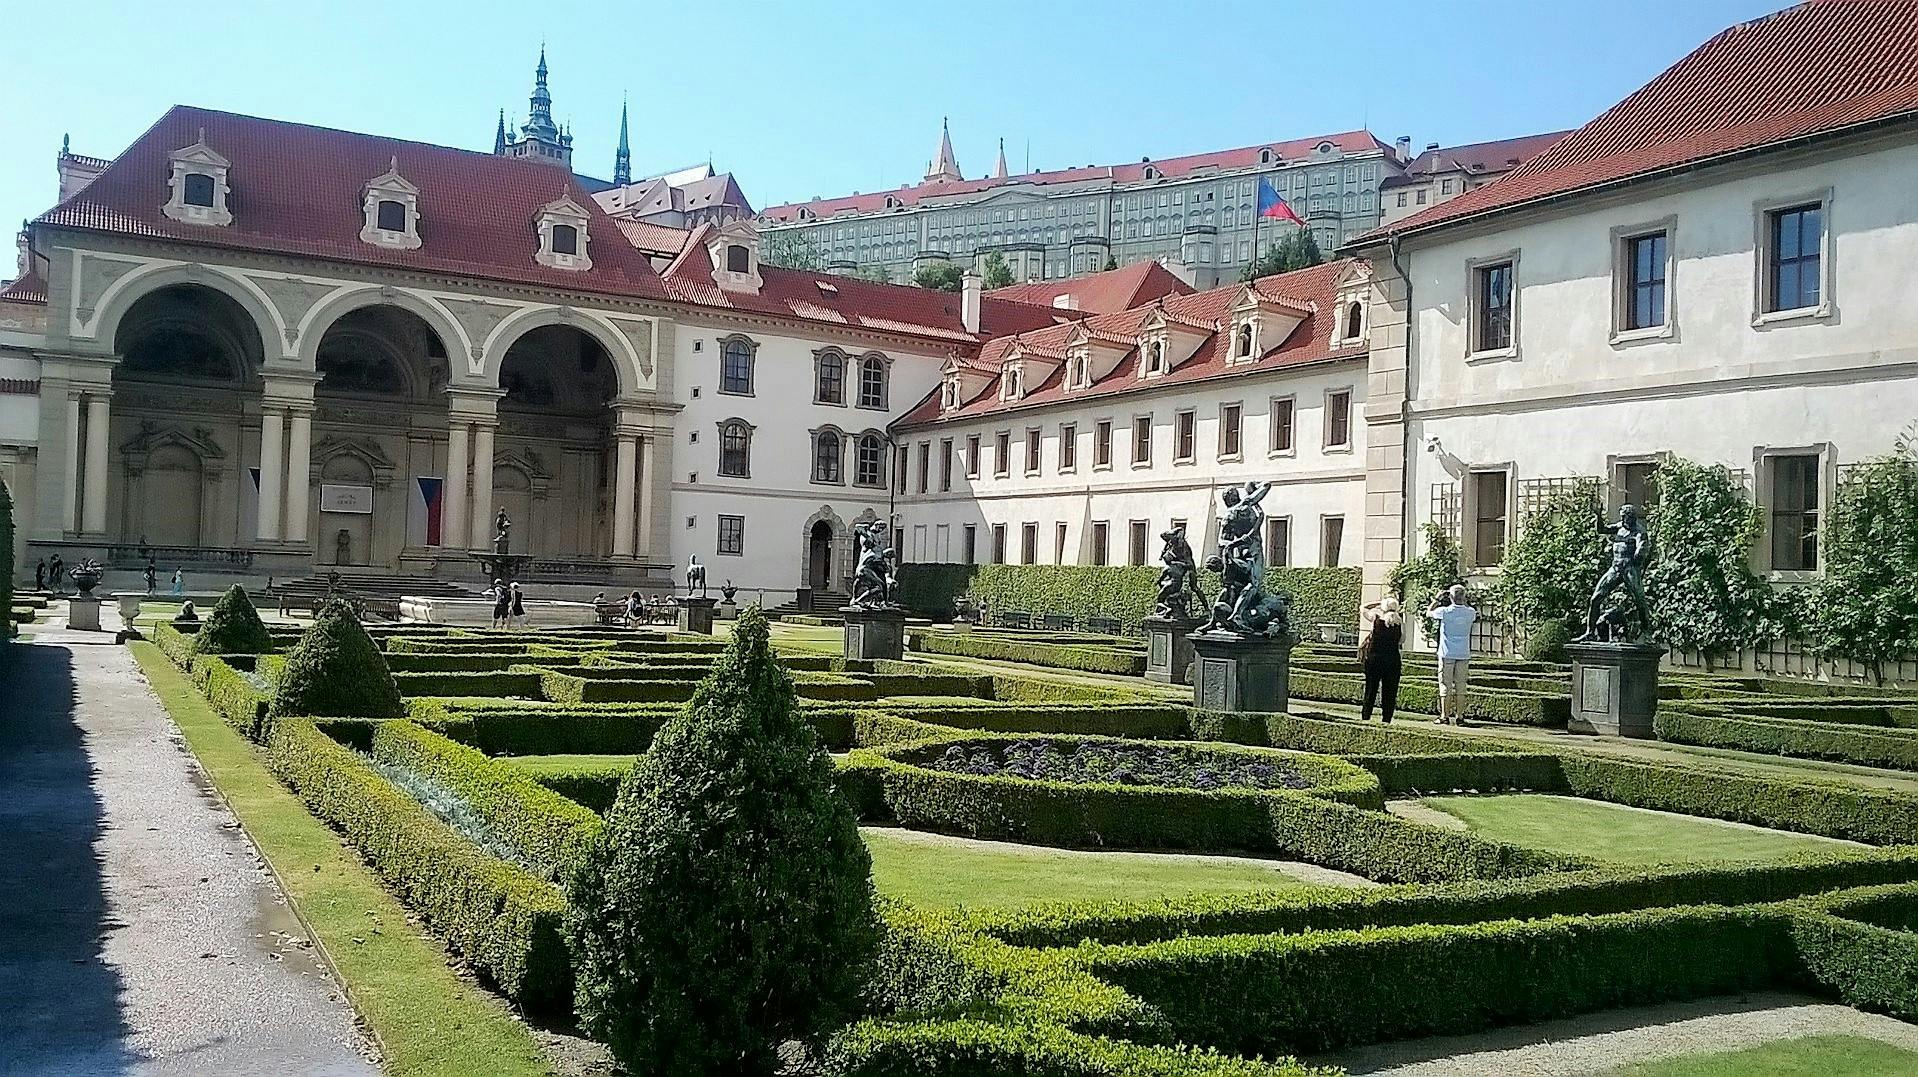 Must-sees of Prague guided tour with Wallenstein Palace Gardens Musement